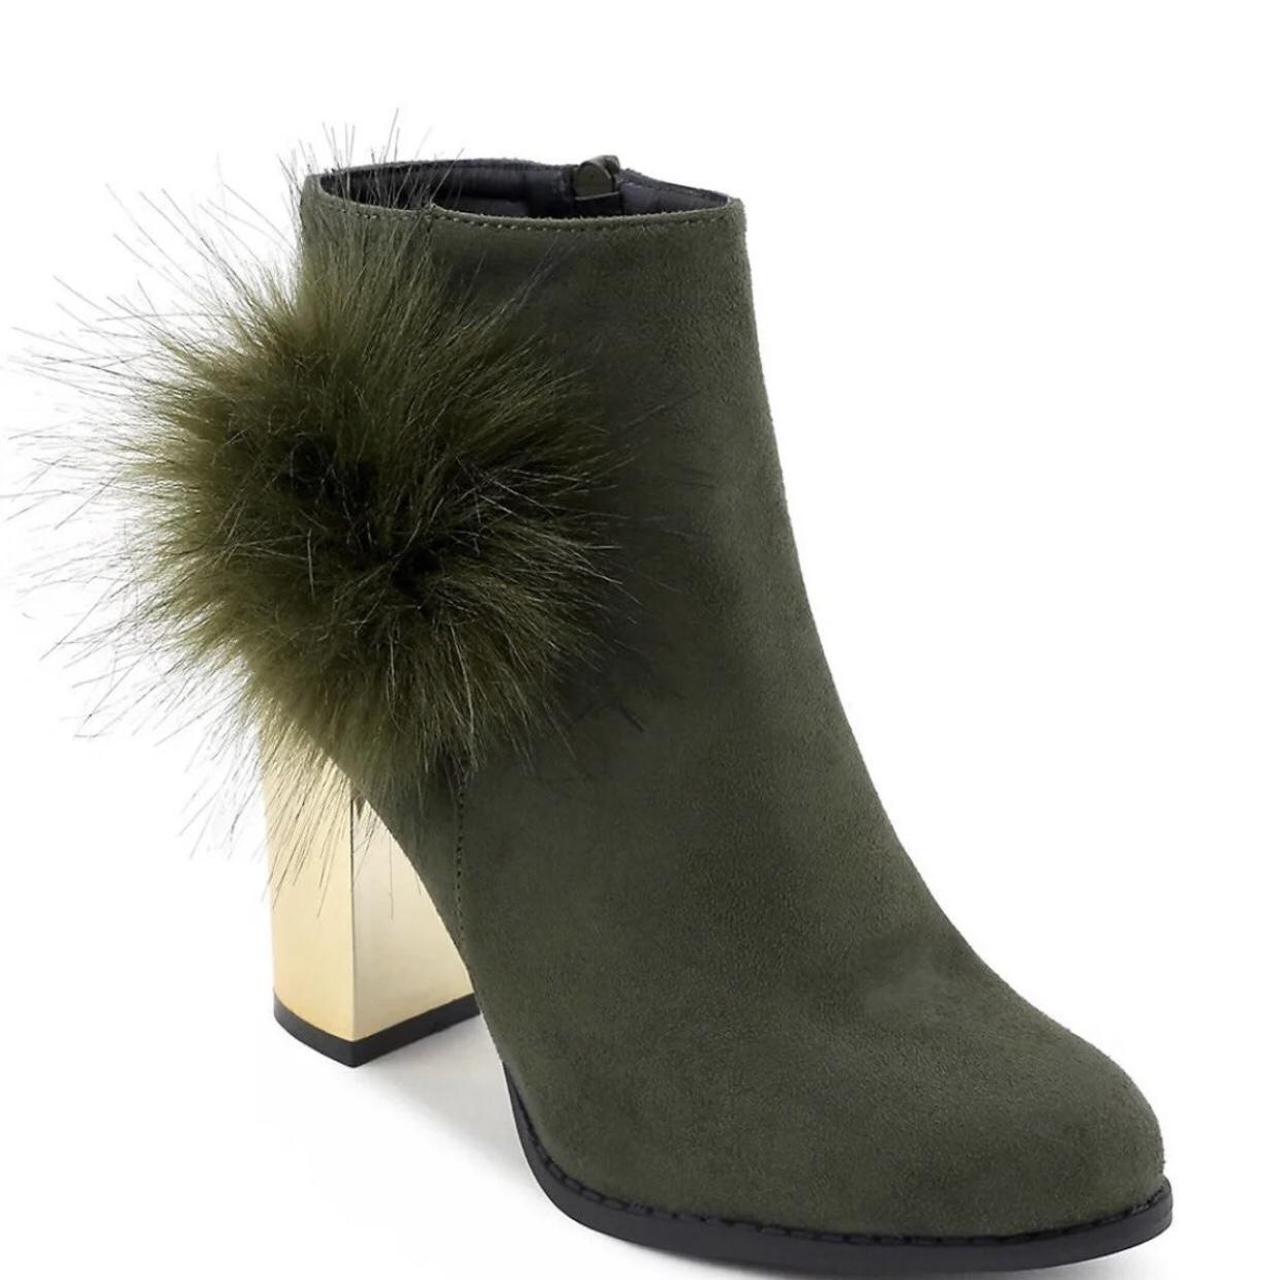 Product Image 1 - Olivia Miller Pom Ankle boot
BOOT